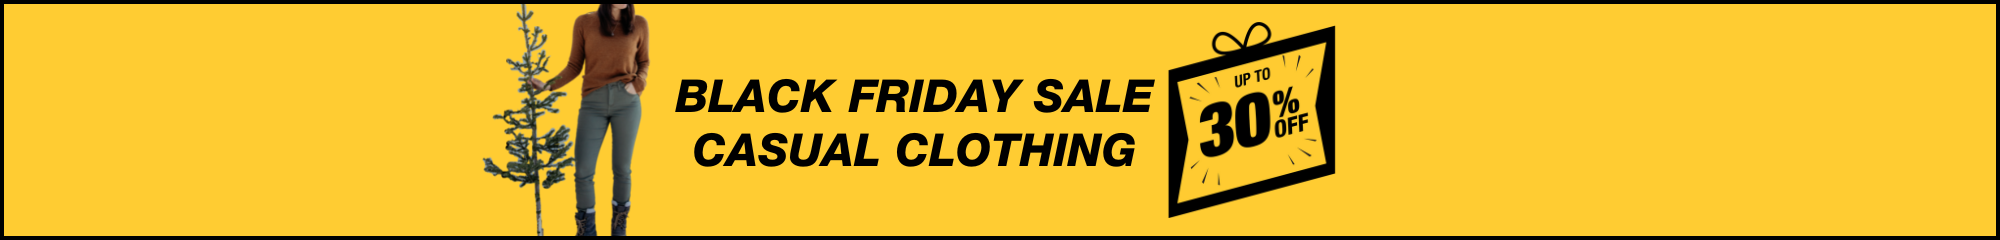 Black Friday Deals on Casual Clothing